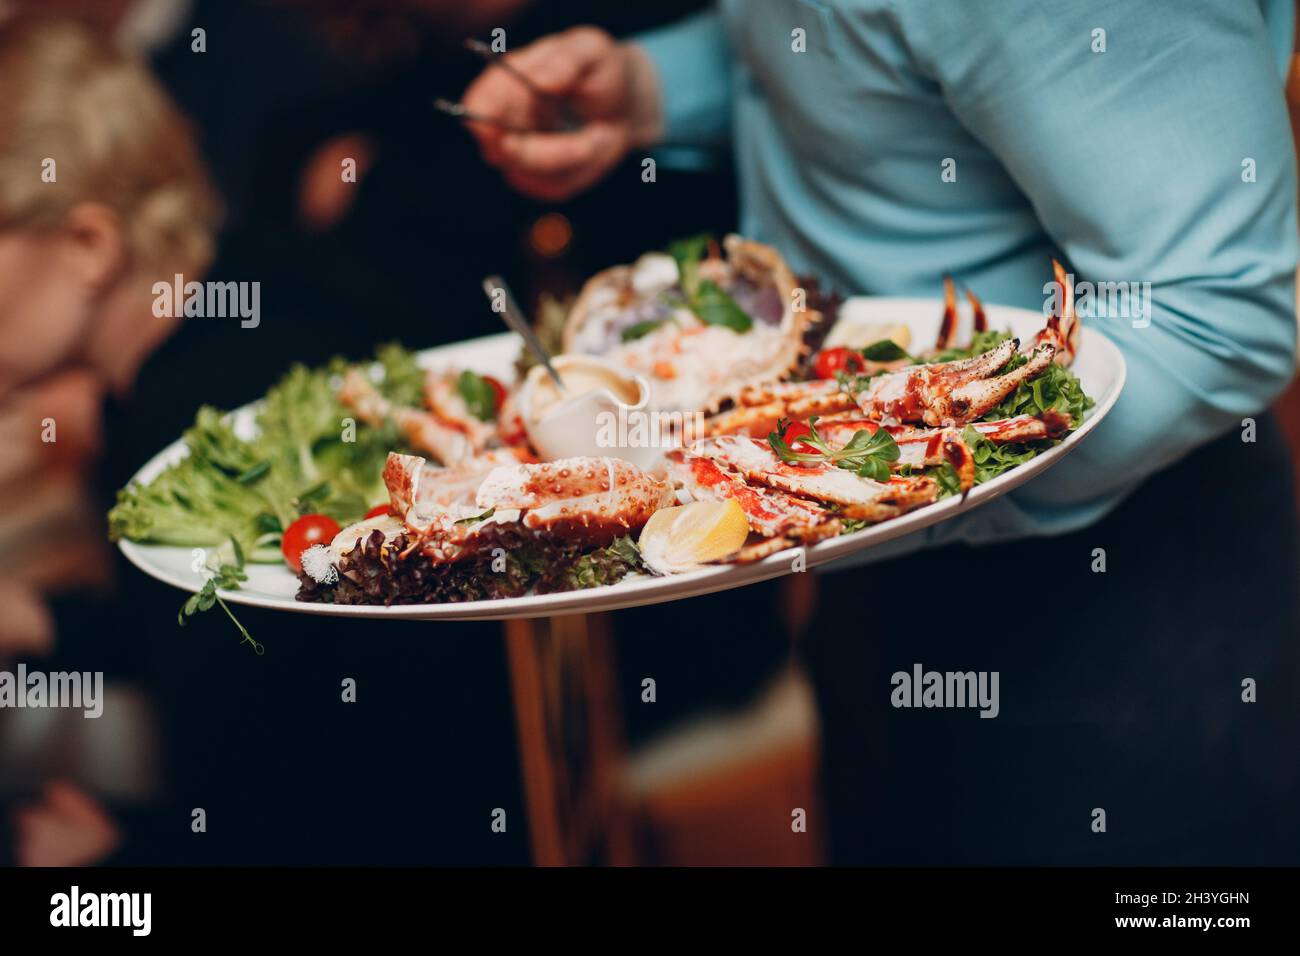 A waiter in a restaurant holds seafood dishes and serves a table catering Concept Healthy food octopus and crabs shellfish Stock Photo